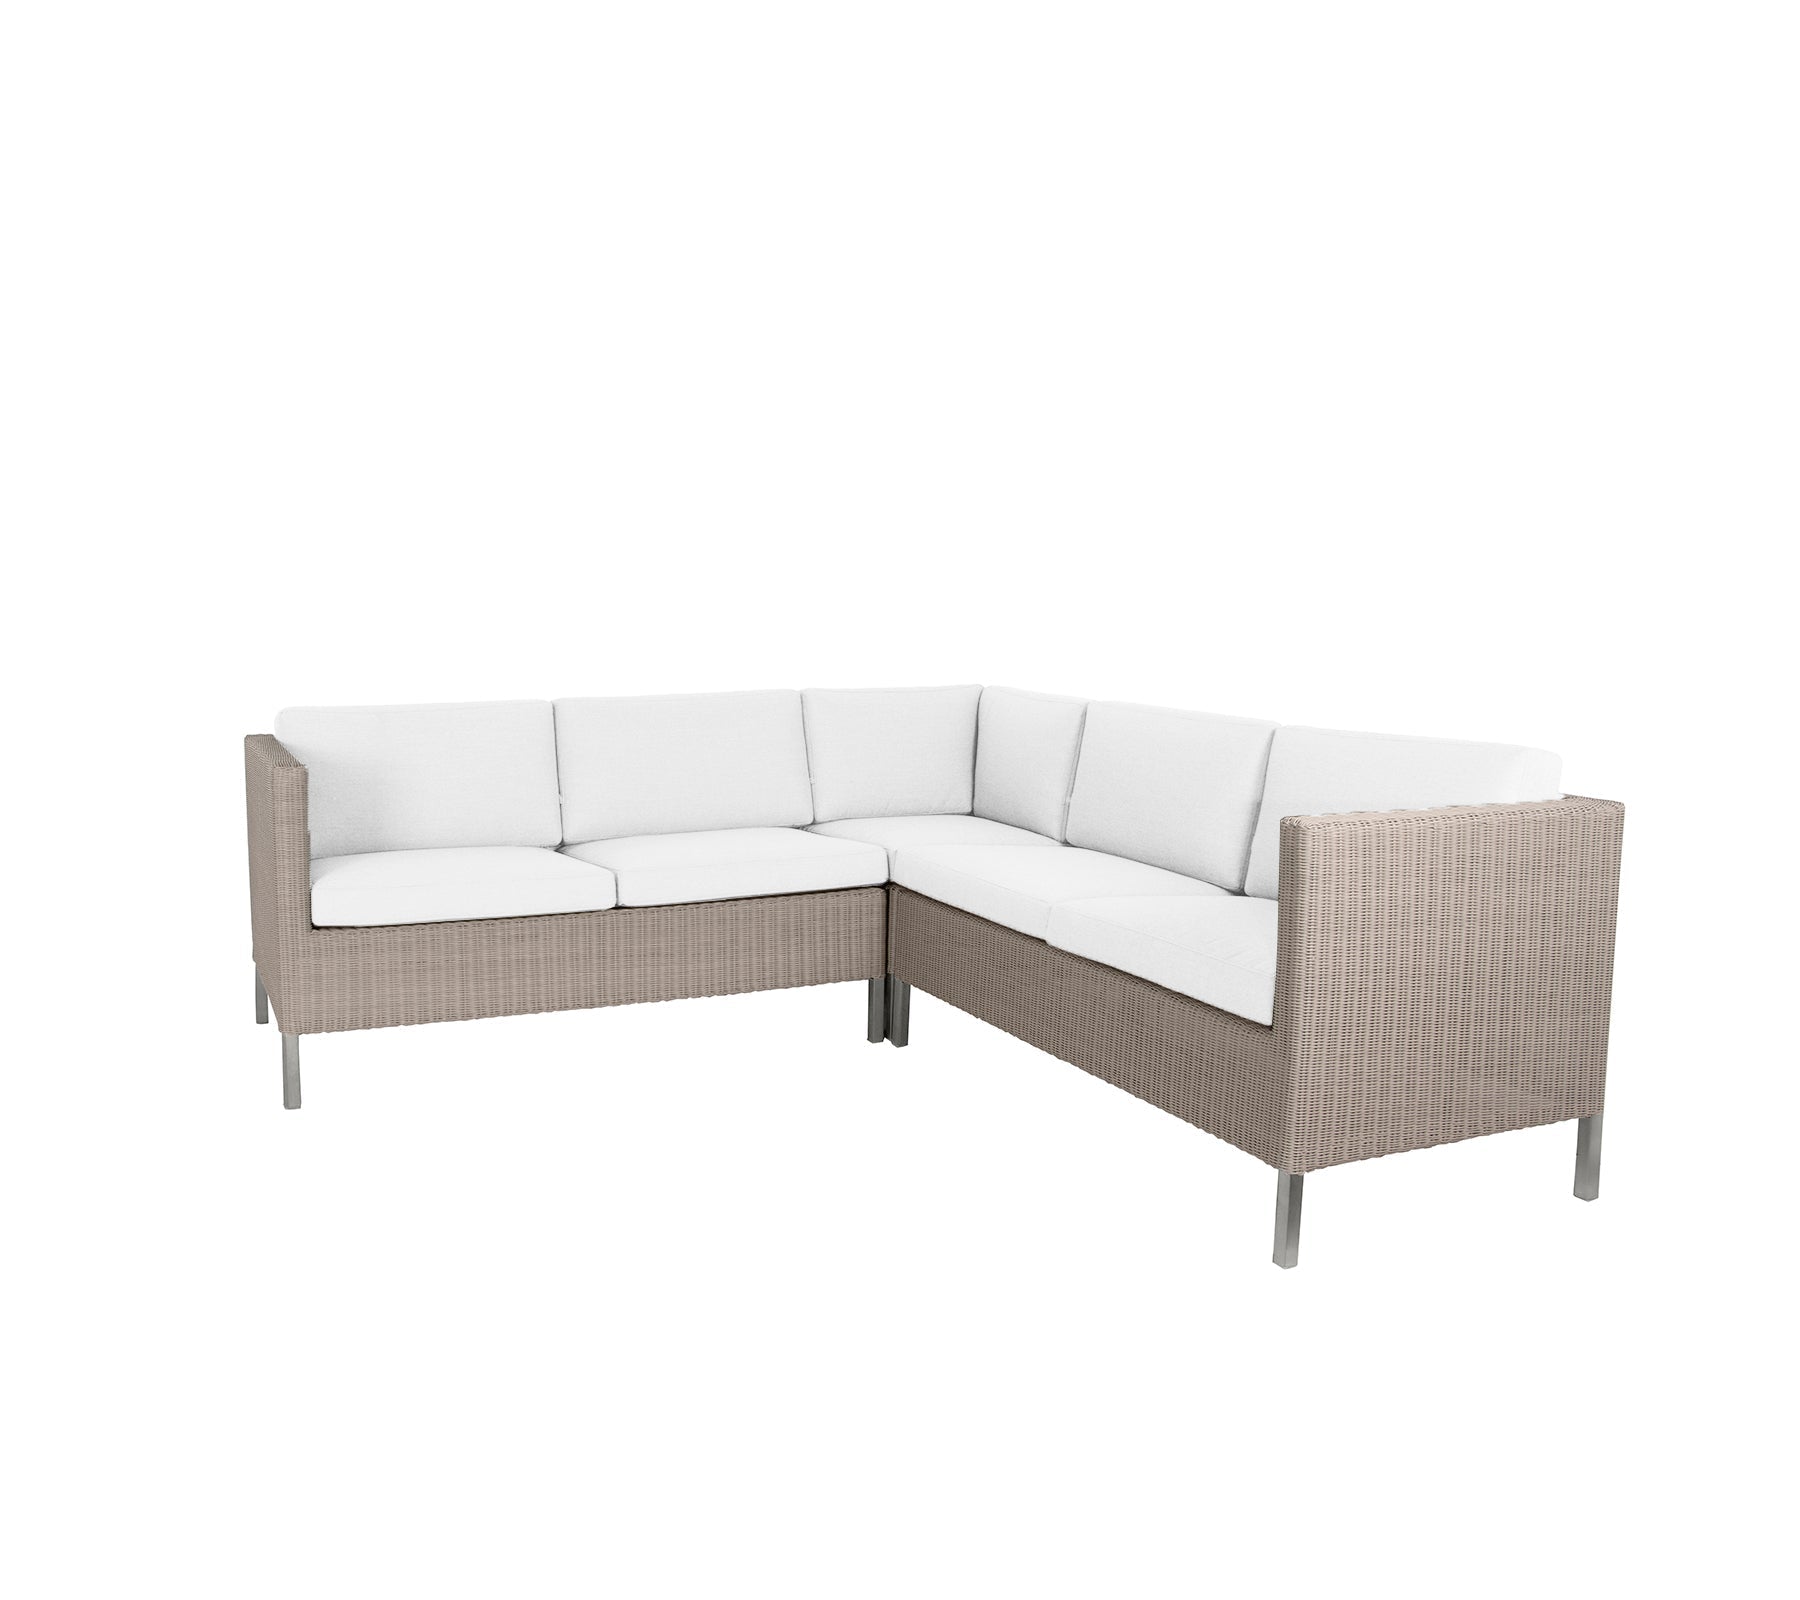 Cane-Line Denmark Taupe - Cane-line Weave - w/White cushions Connect dining lounge w/Cane-line Natté cushions (20)